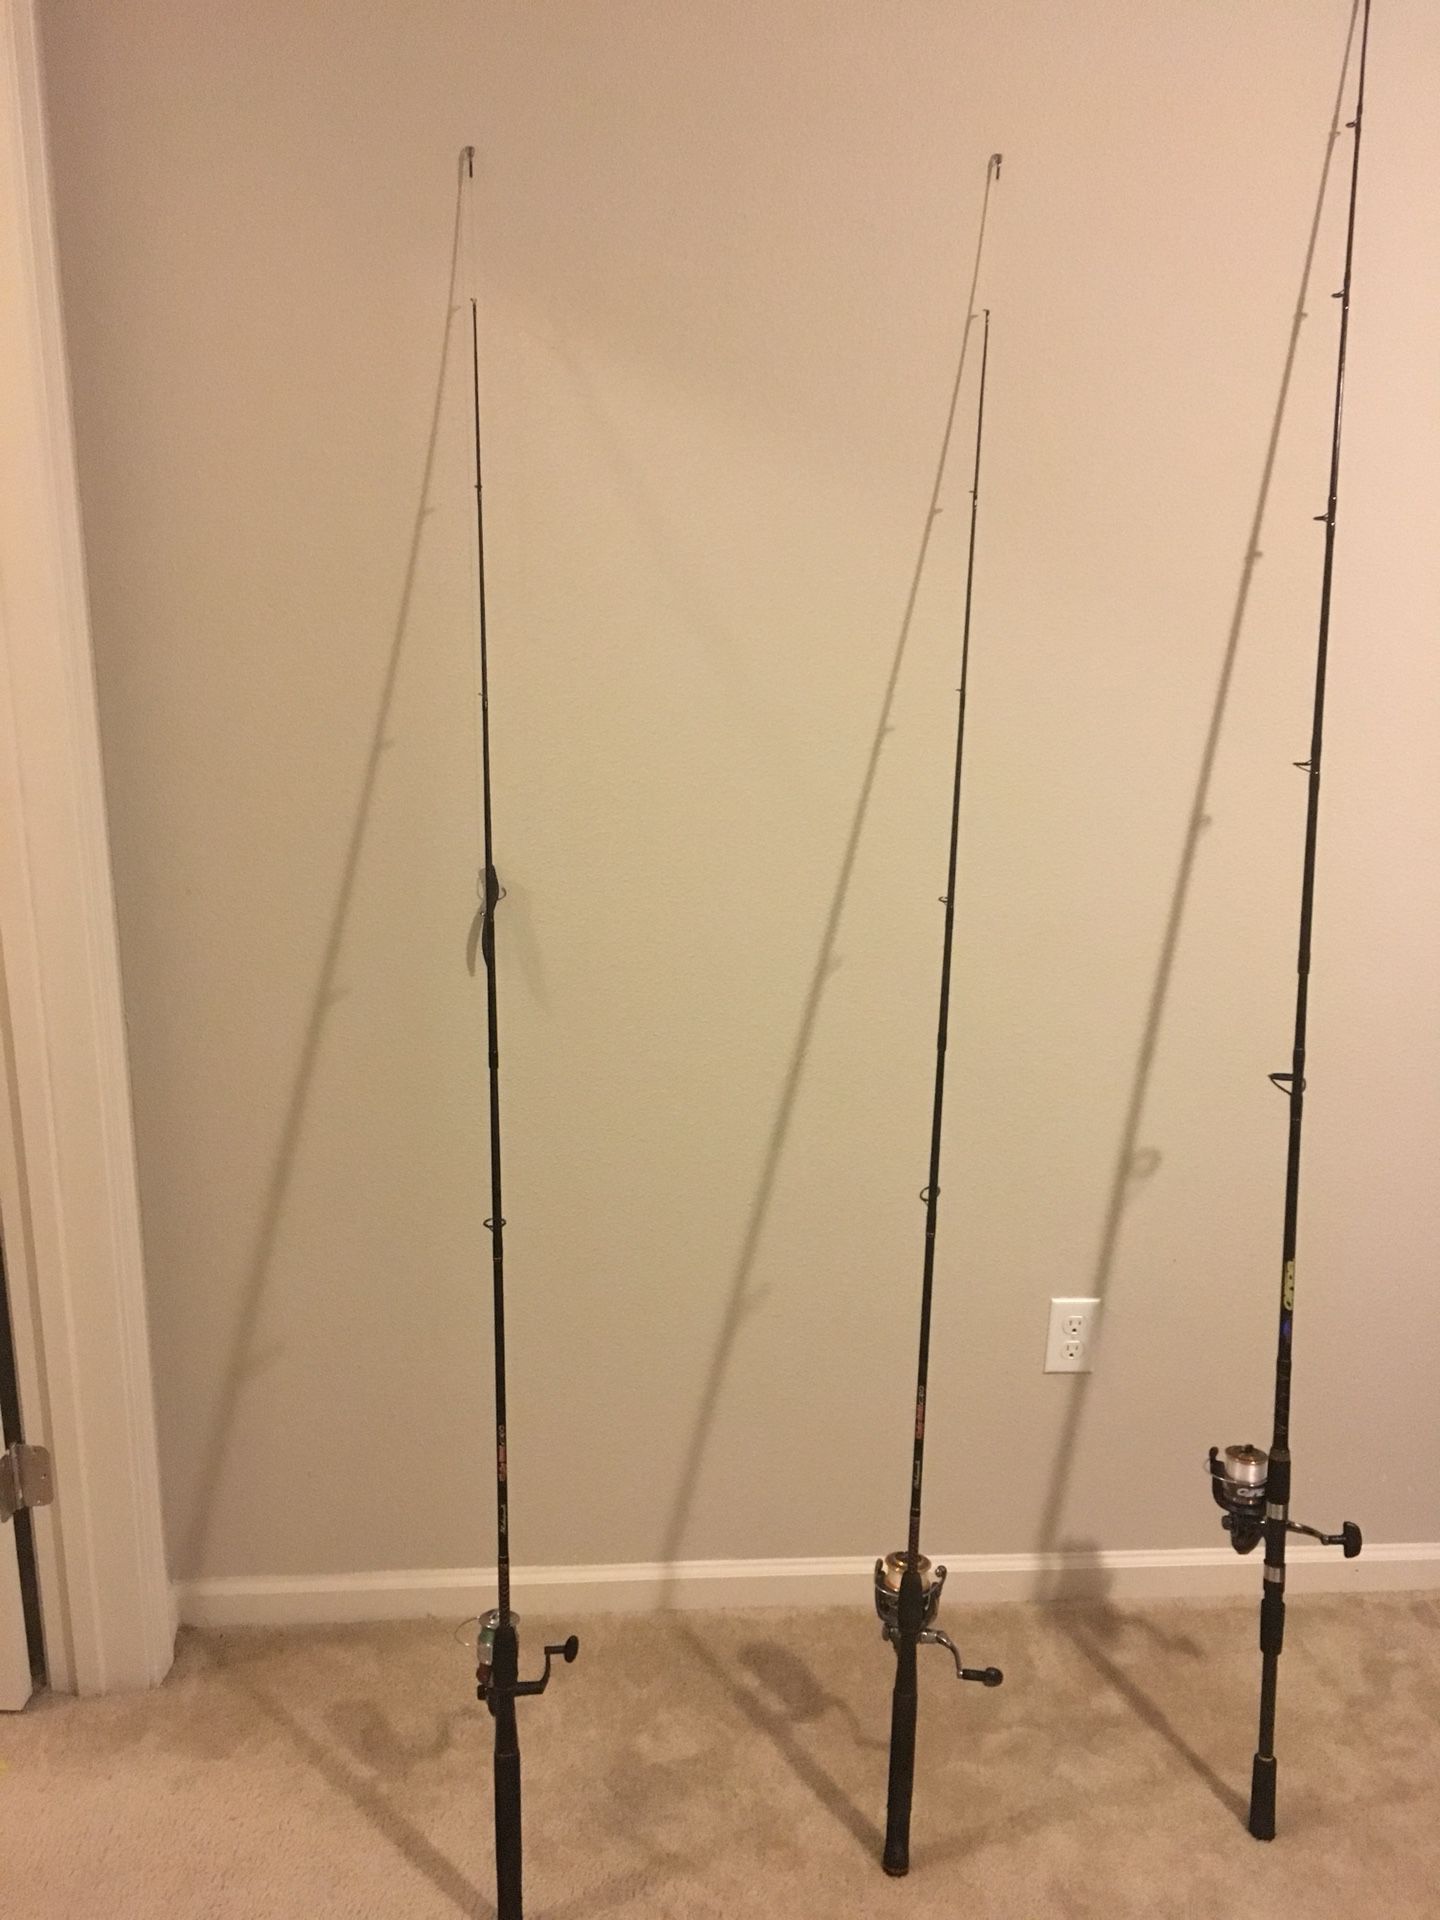 Two ugly sticks fishing rod for sale. Like brand new